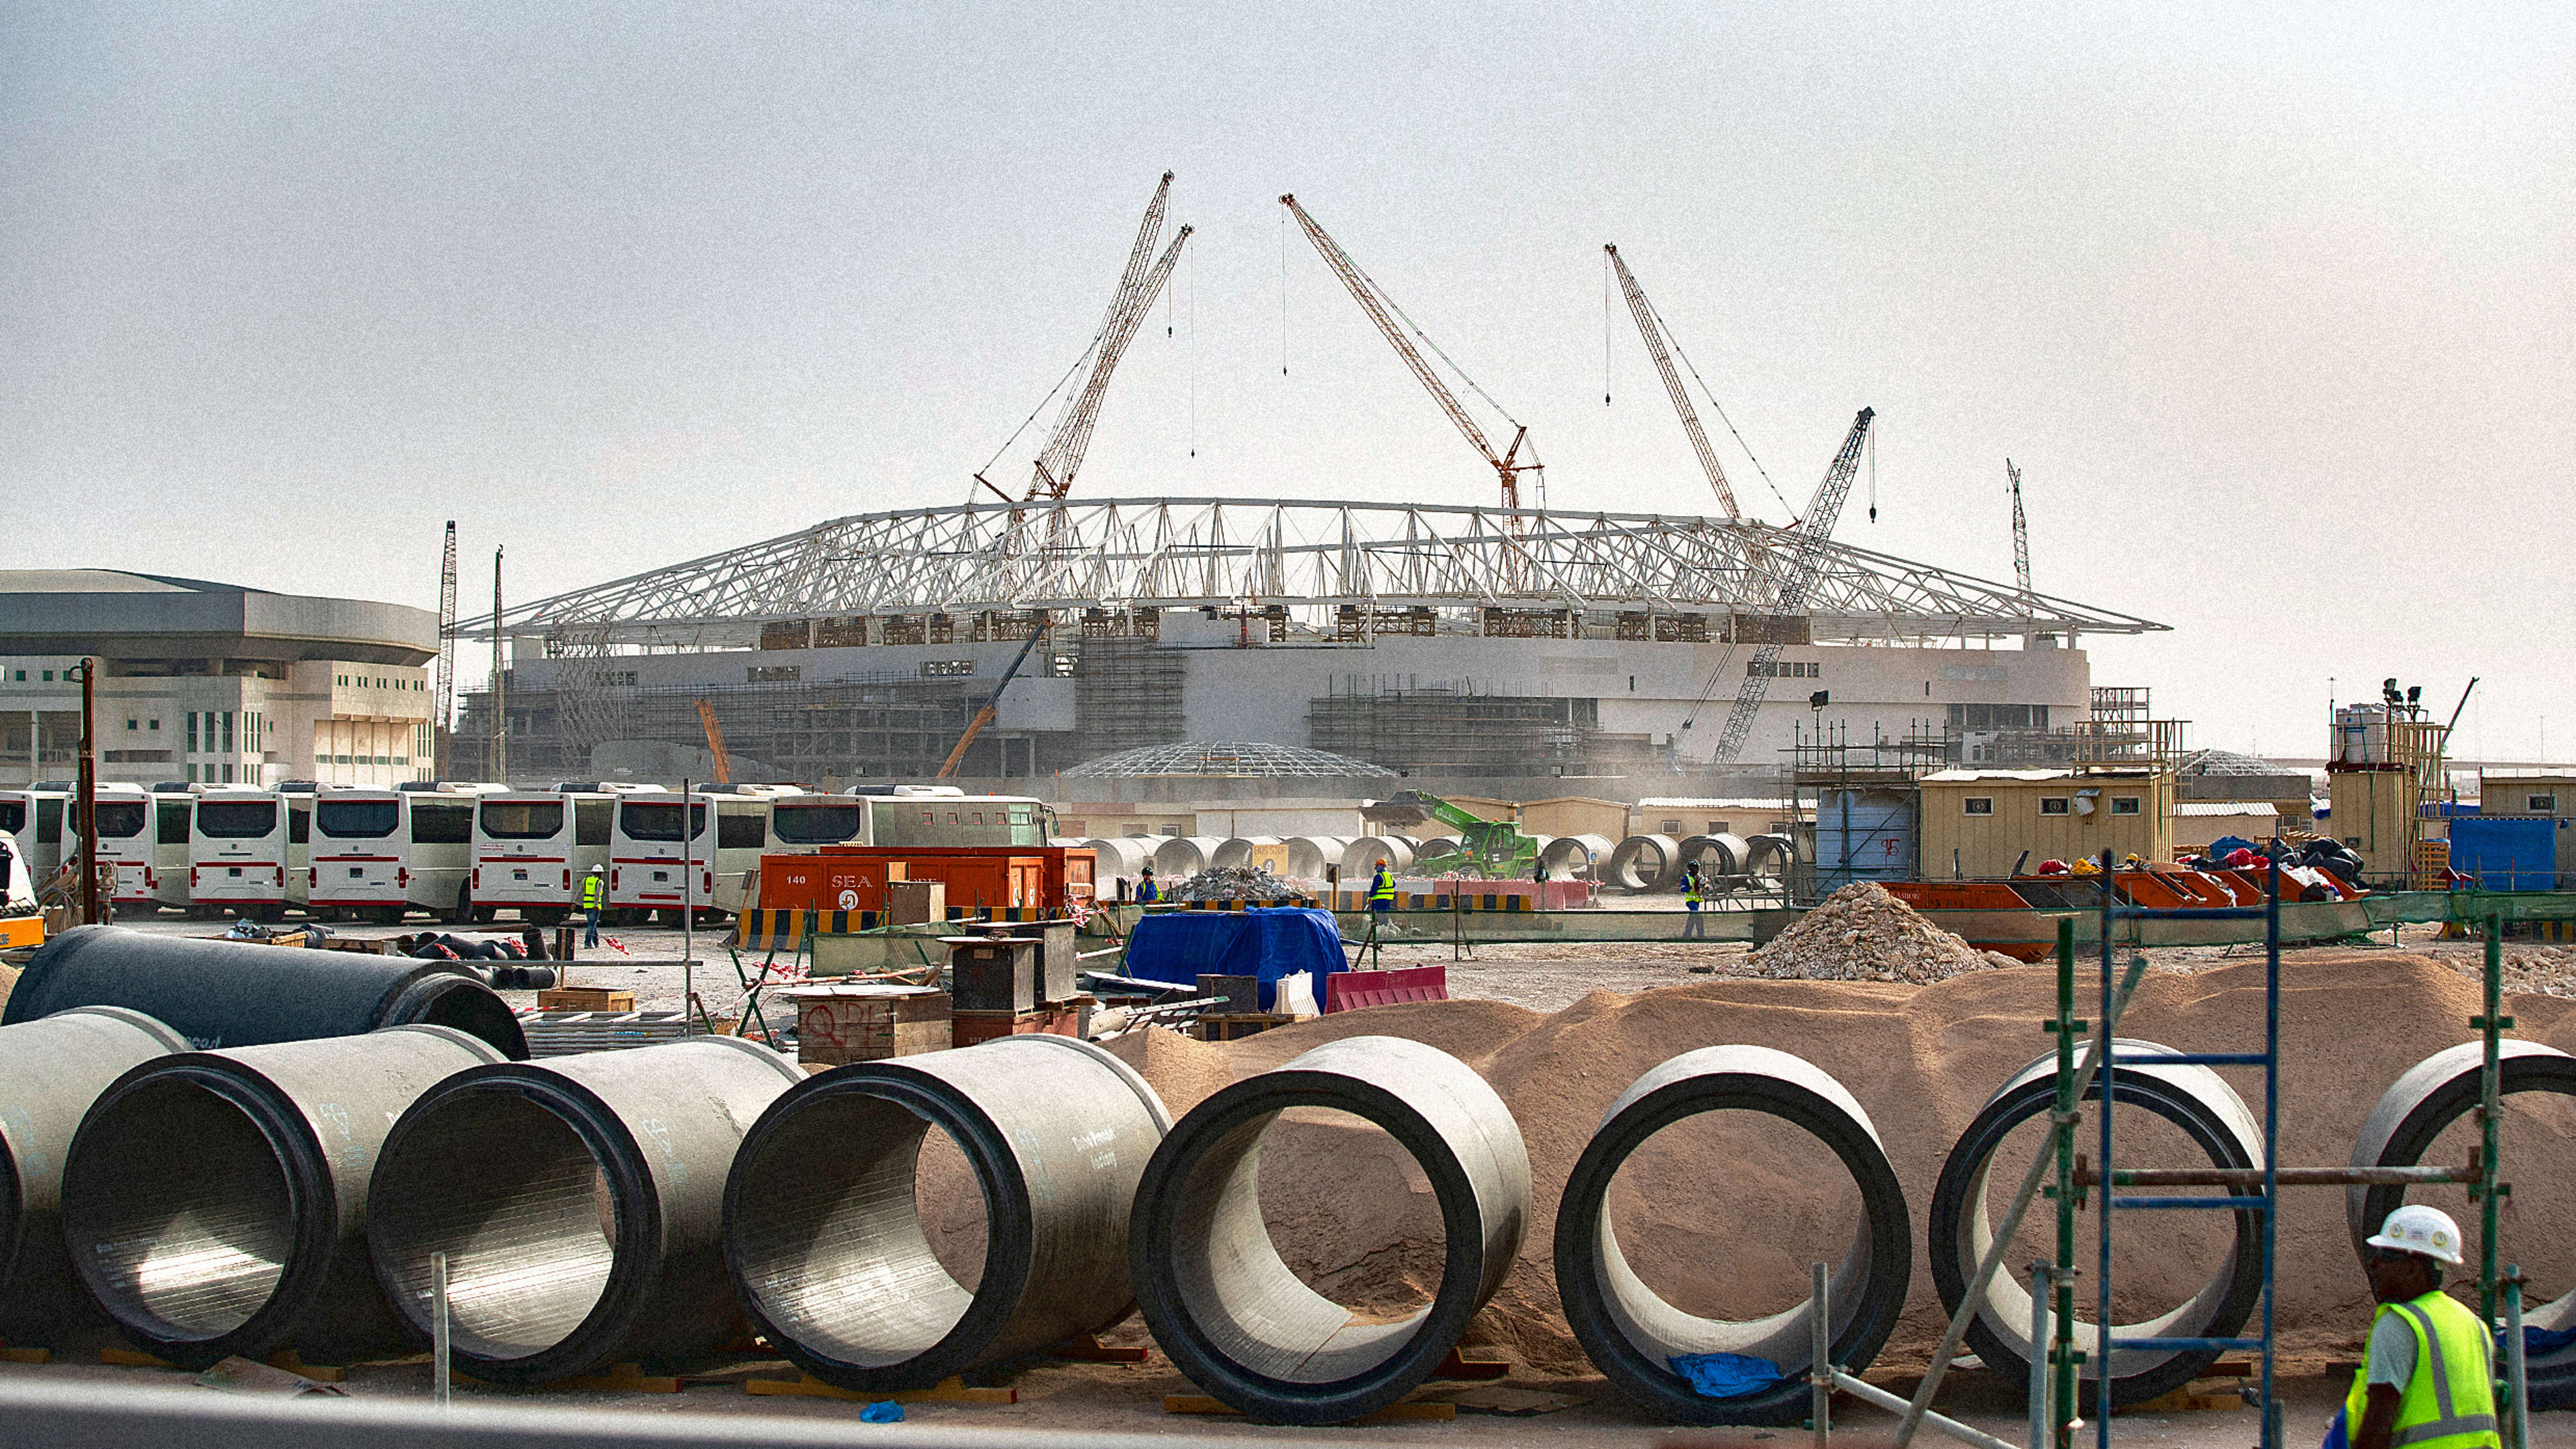 At least 6,500 workers have died building Qatar’s World Cup